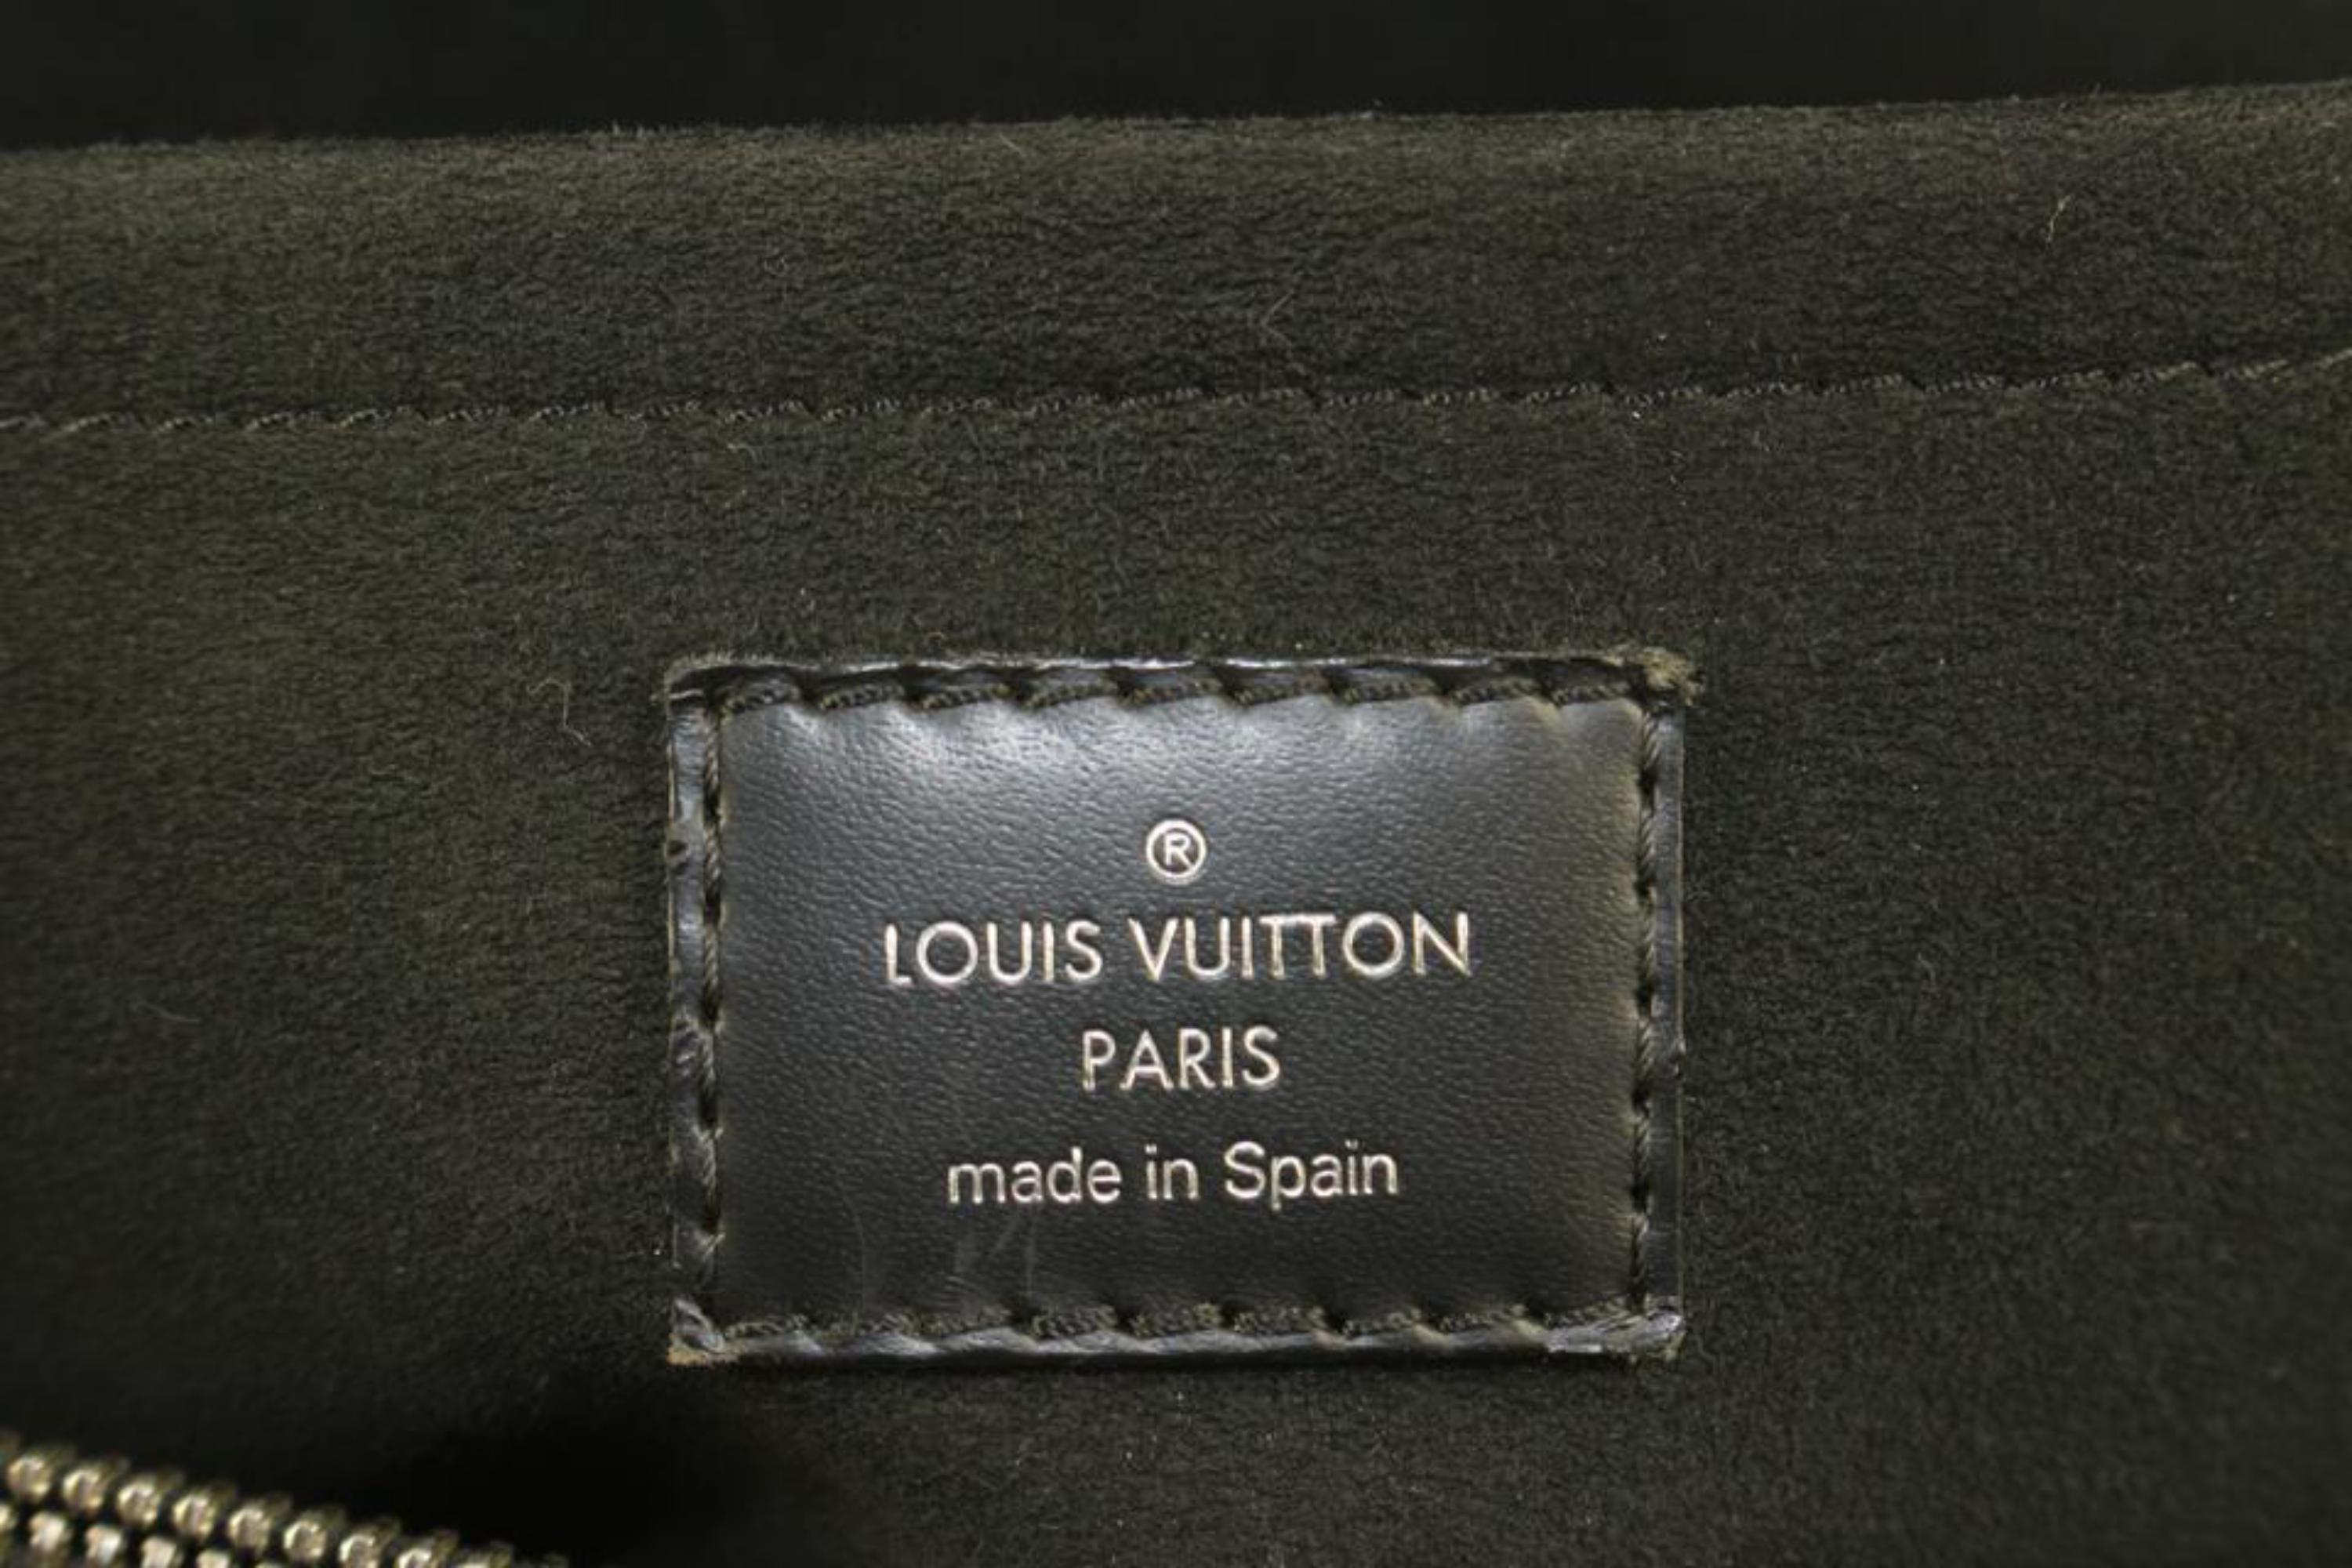 Louis Vuitton Black Epi Leather Noir Marly MM 2way Tote Bag 1110lv16 In Excellent Condition For Sale In Dix hills, NY